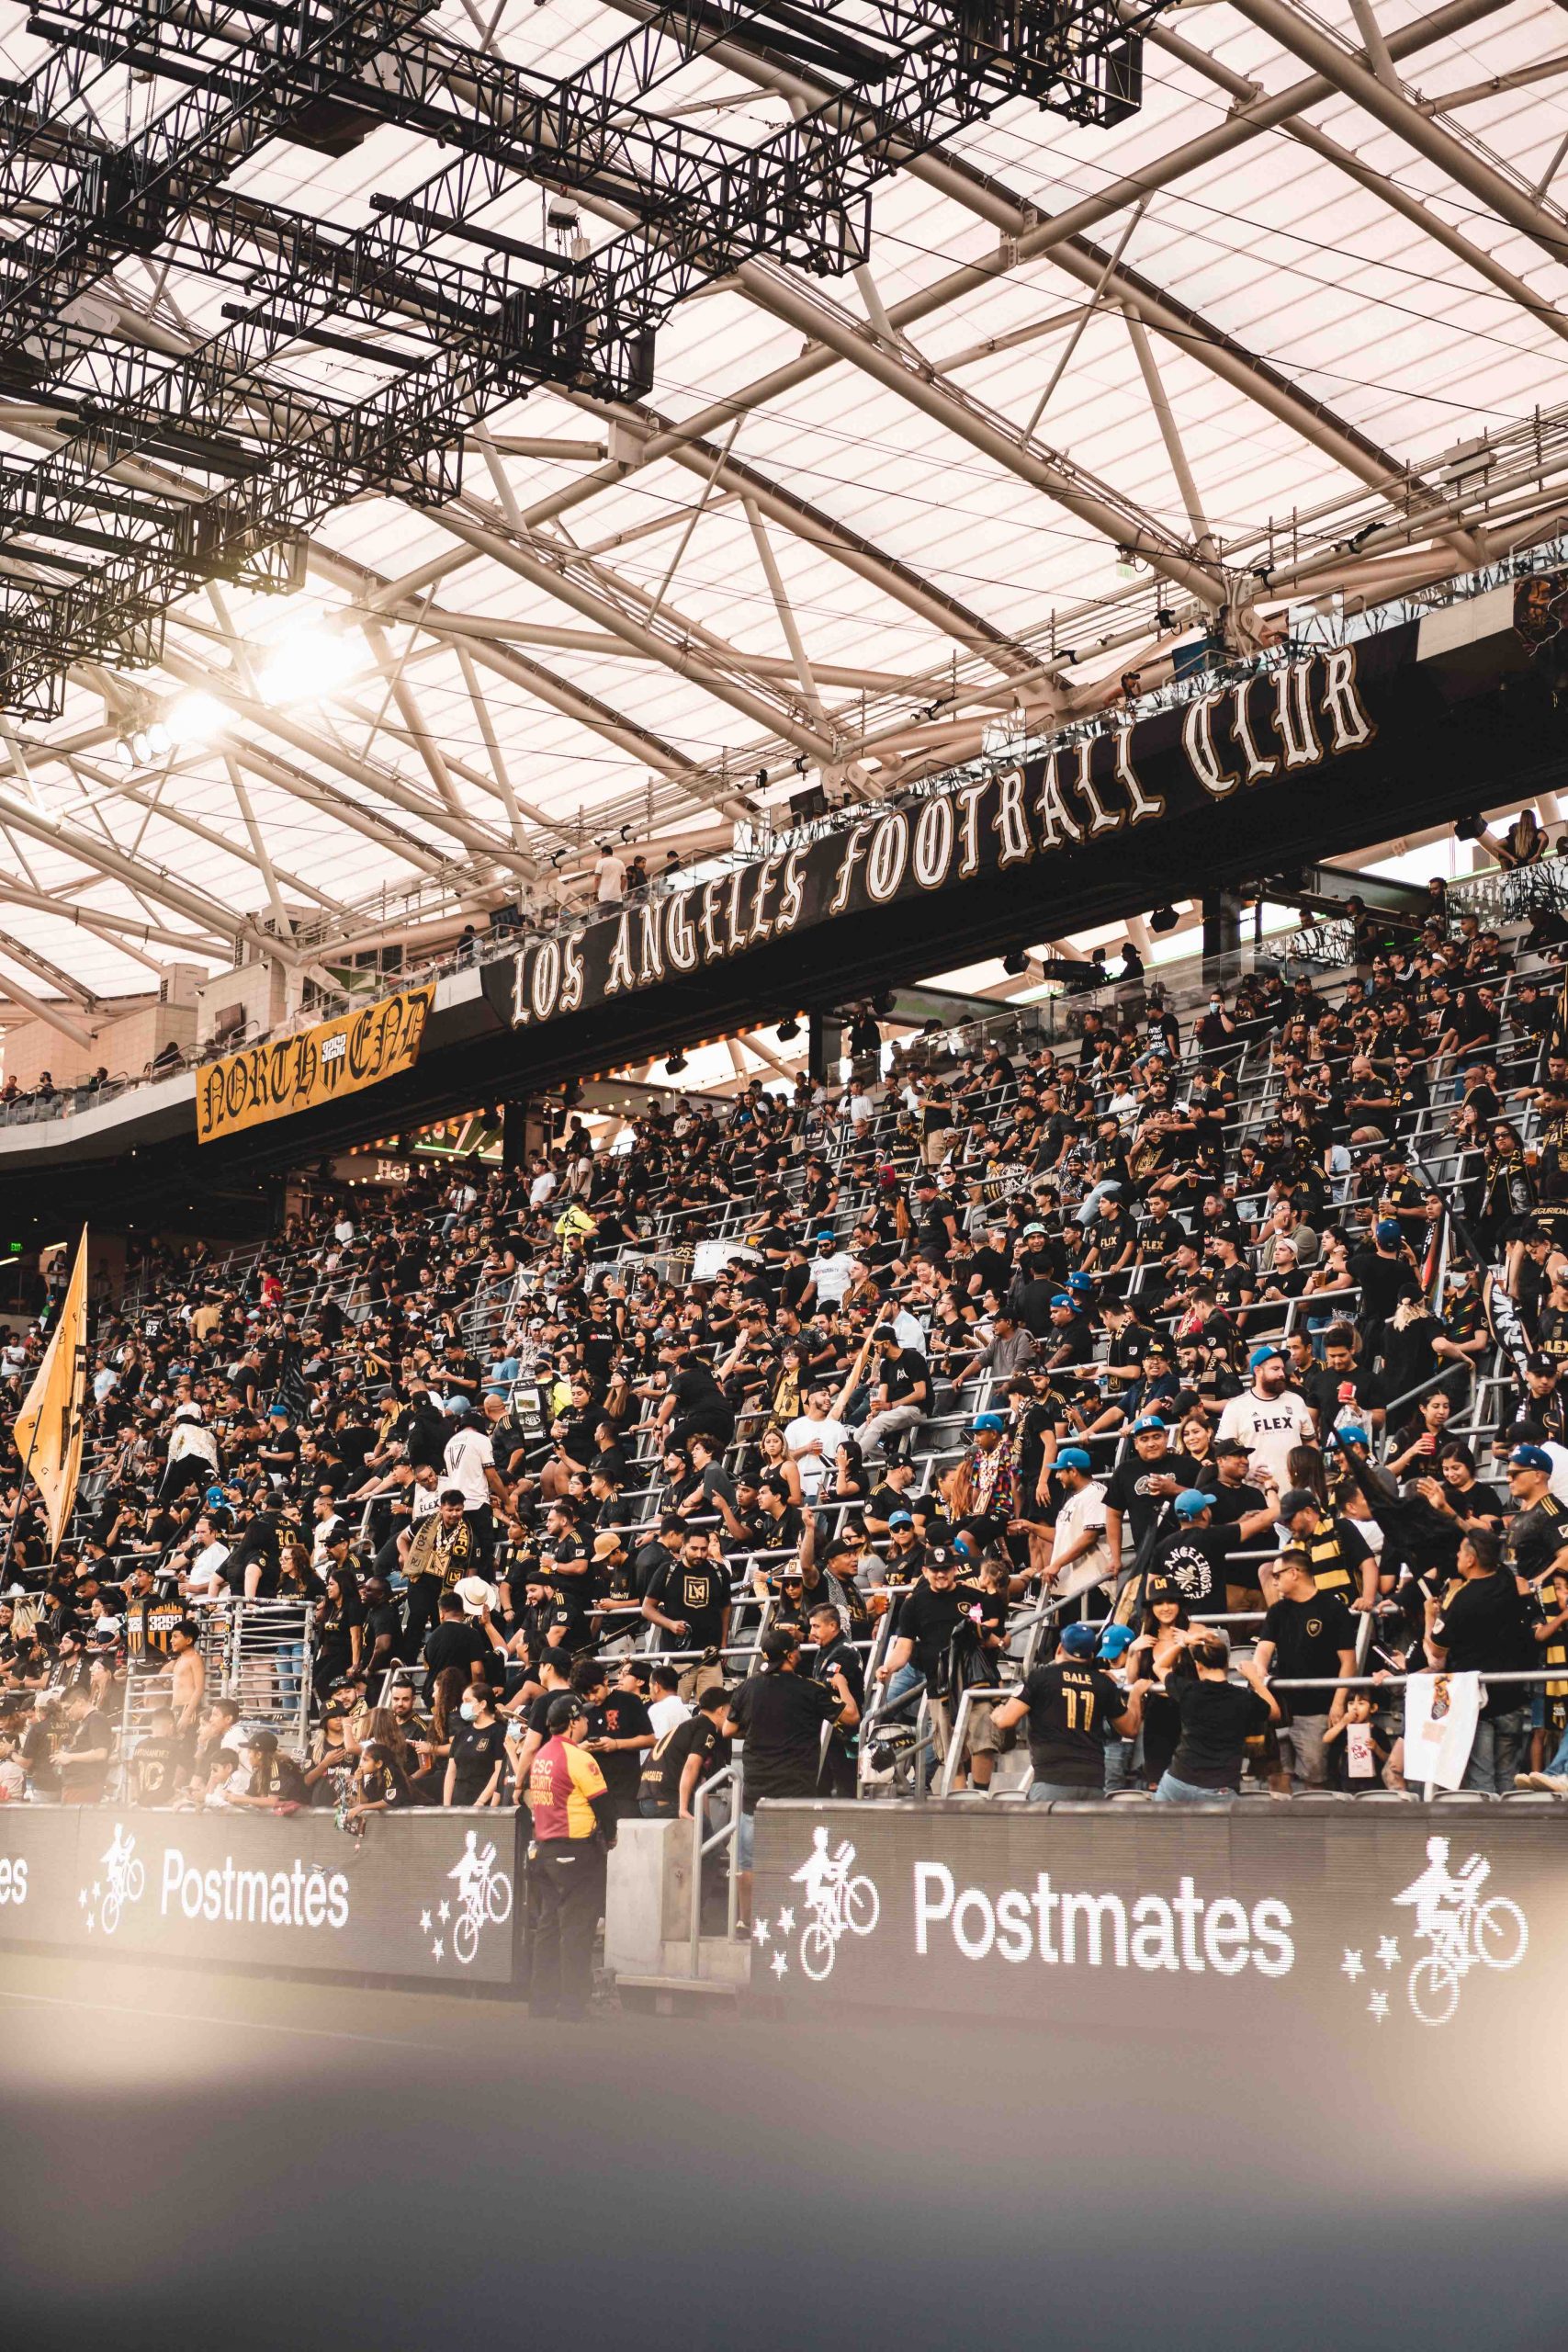 LAFC Supporters